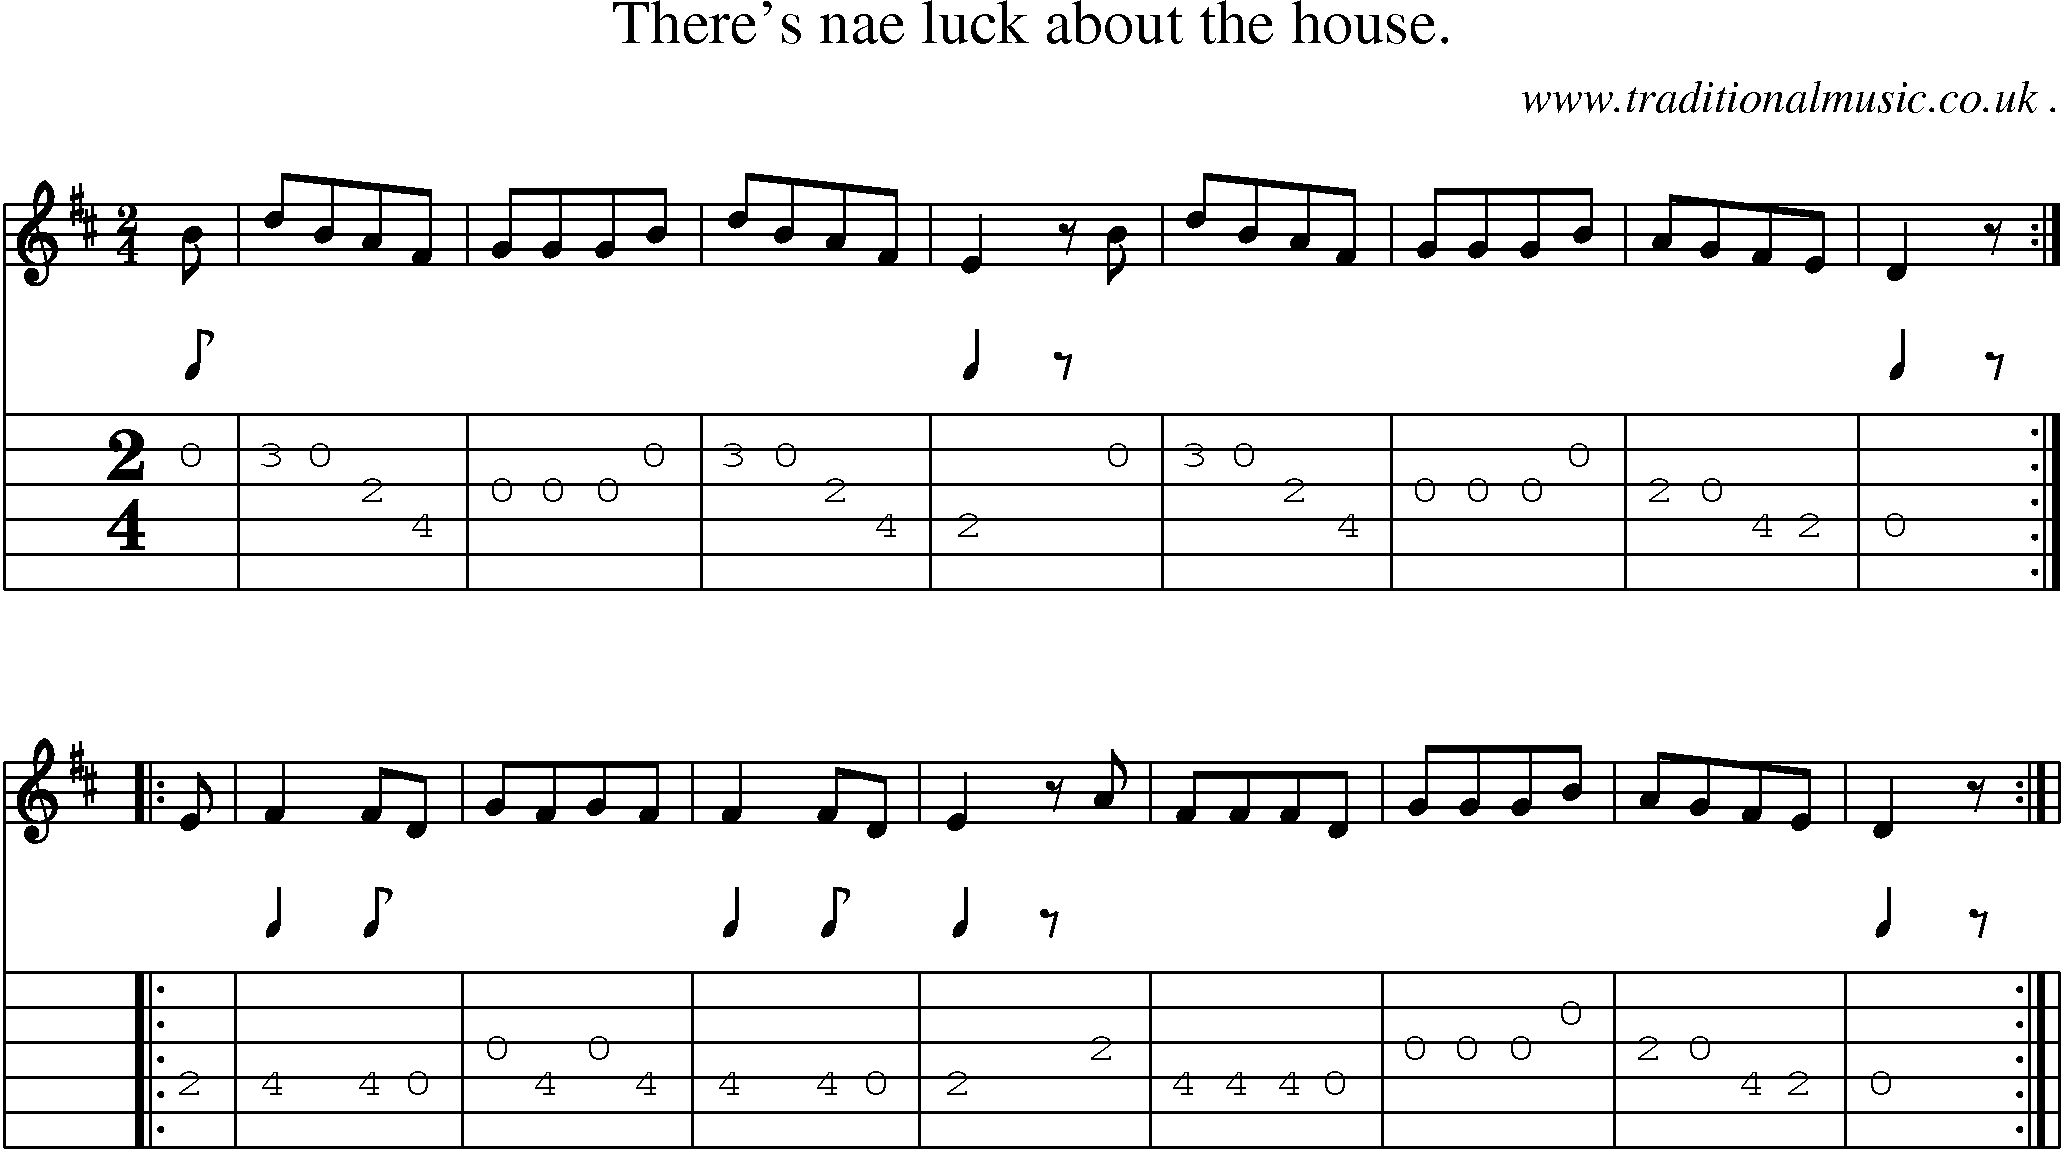 Sheet-Music and Guitar Tabs for Theres Nae Luck About The House